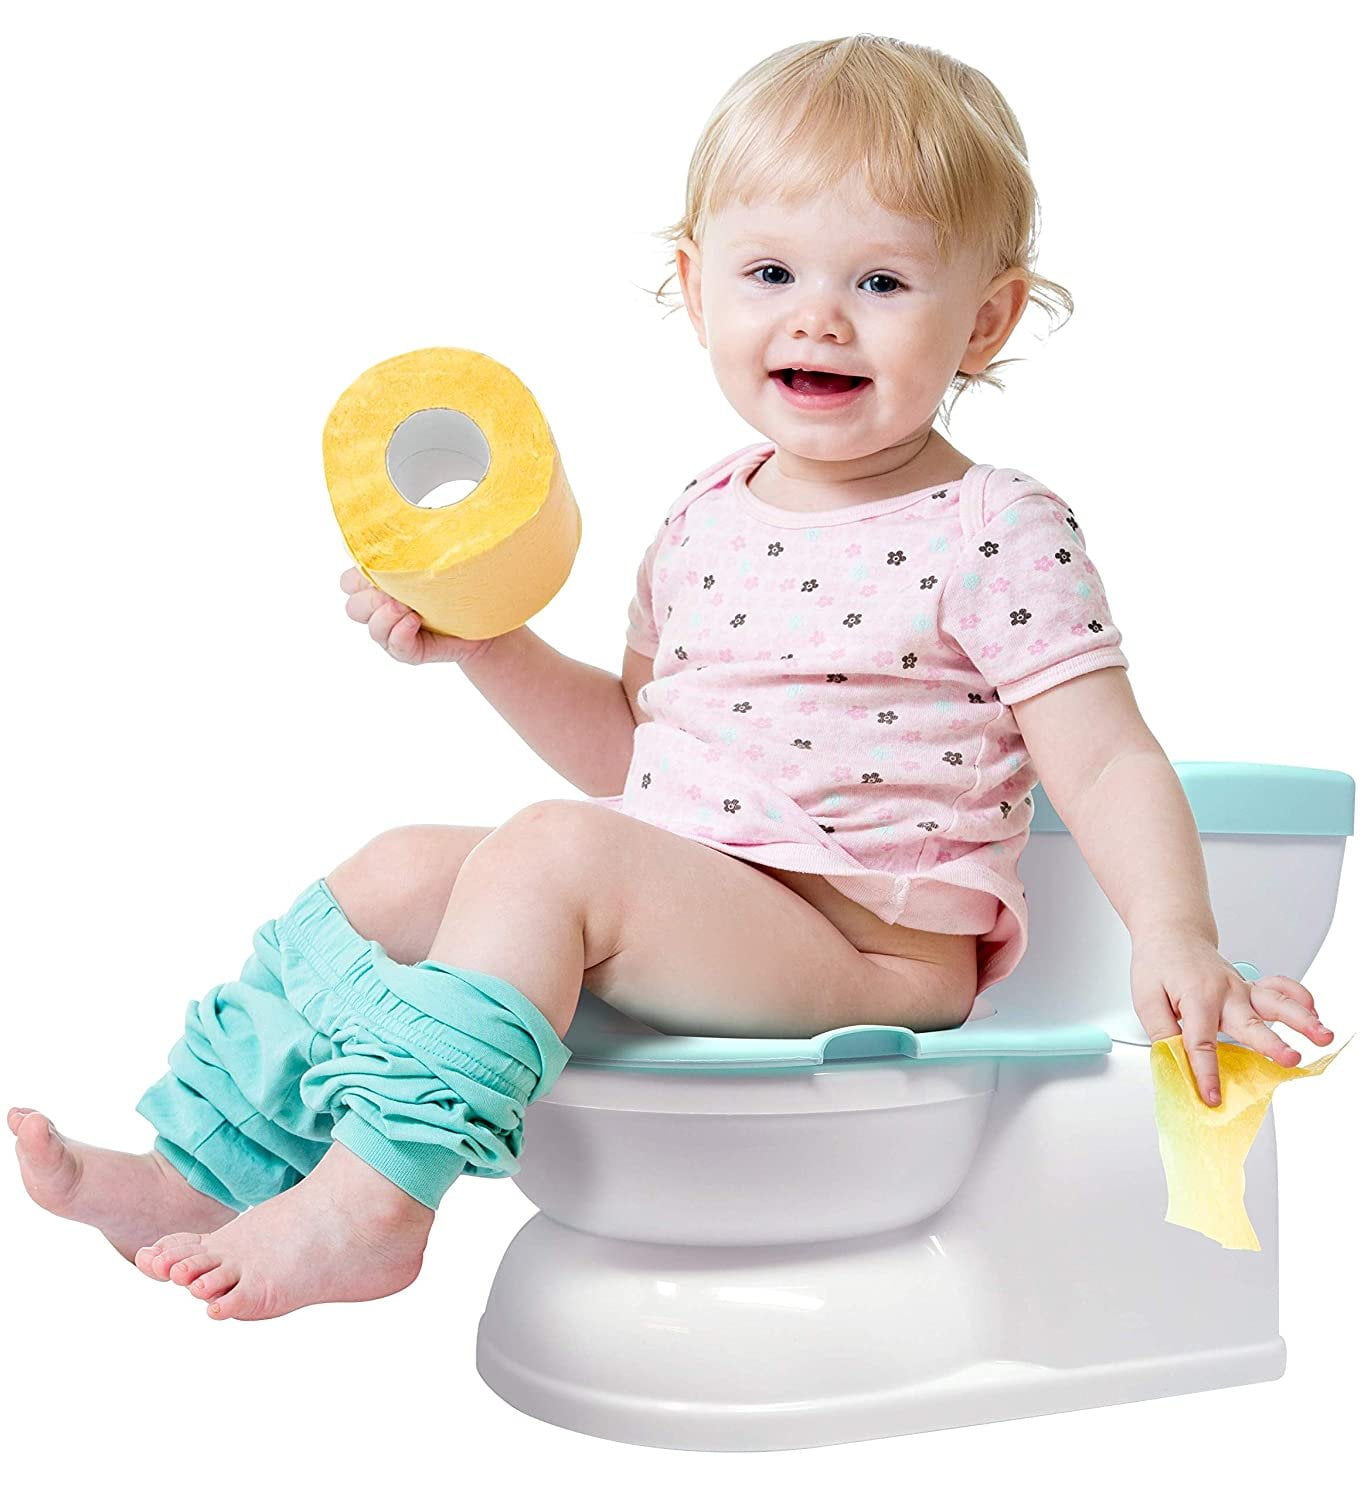 Frozen combined potty training Child baby Handle seat cover bidet toilet chair. 